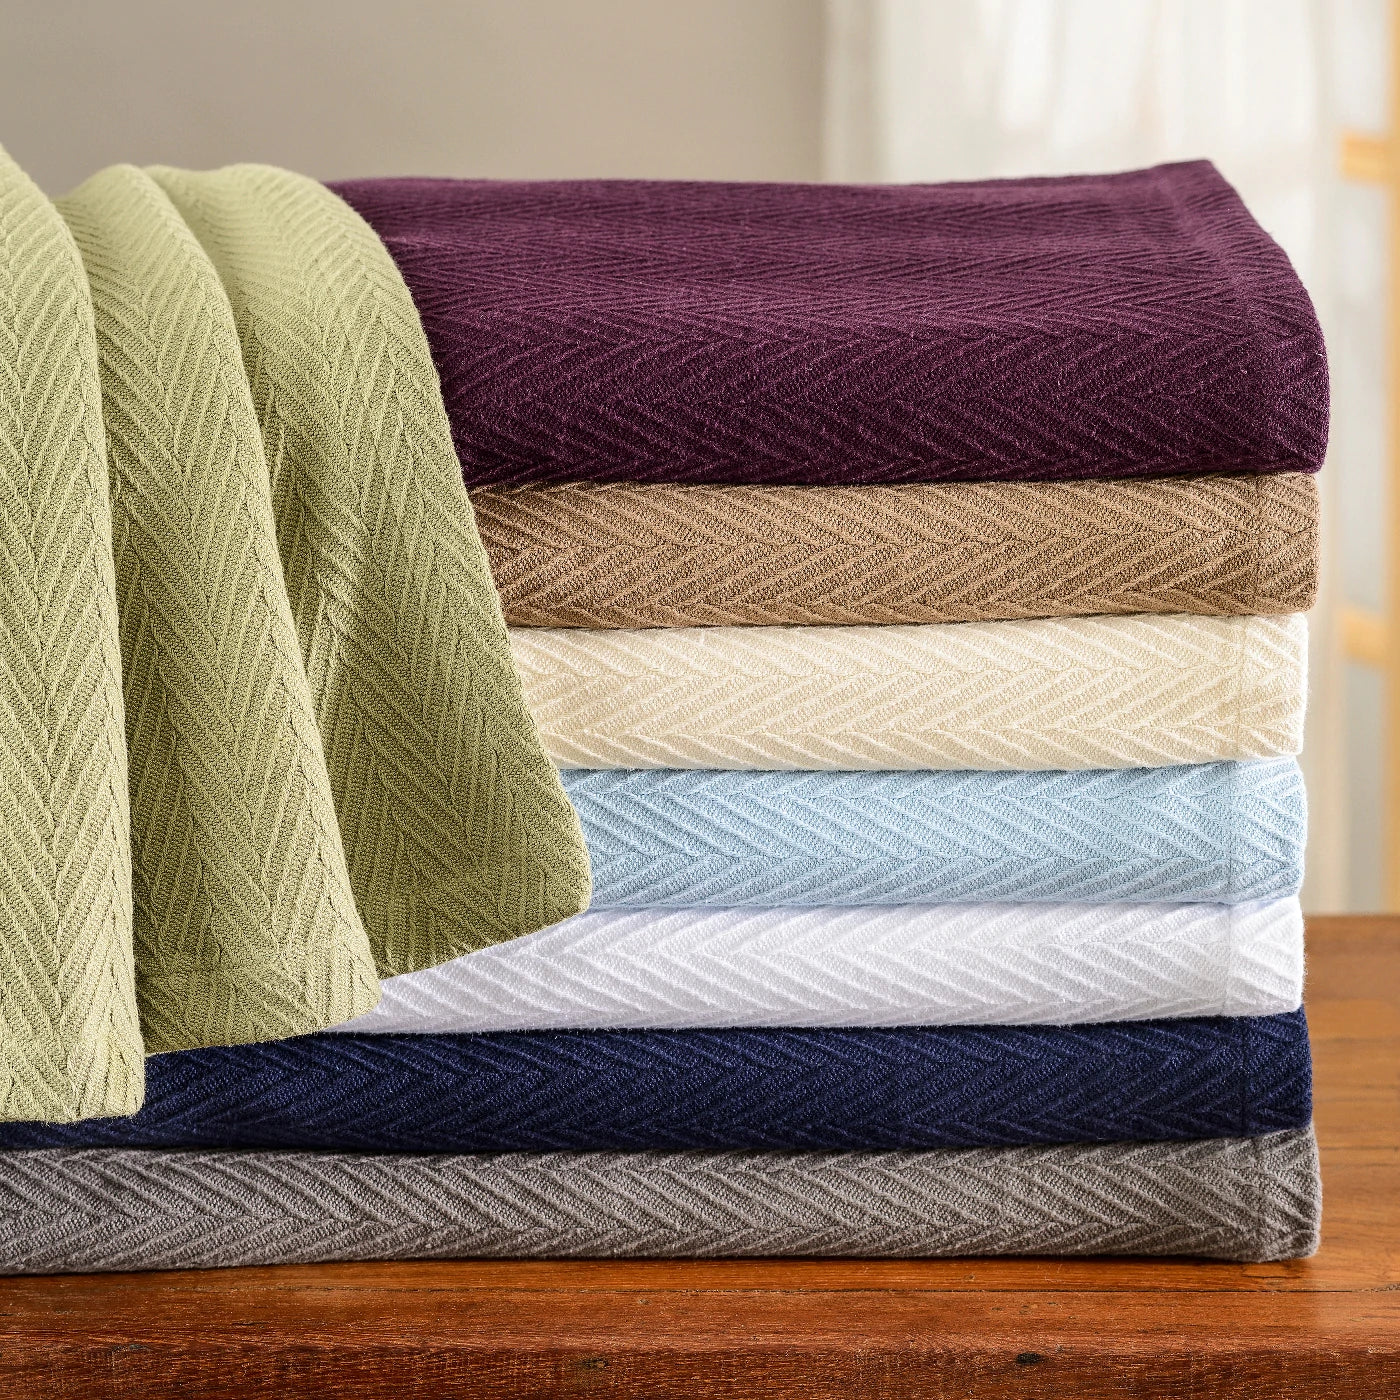 How to choose the Ideal Blanket Color to Perfectly Complement Your Home Décor - Home City Inc